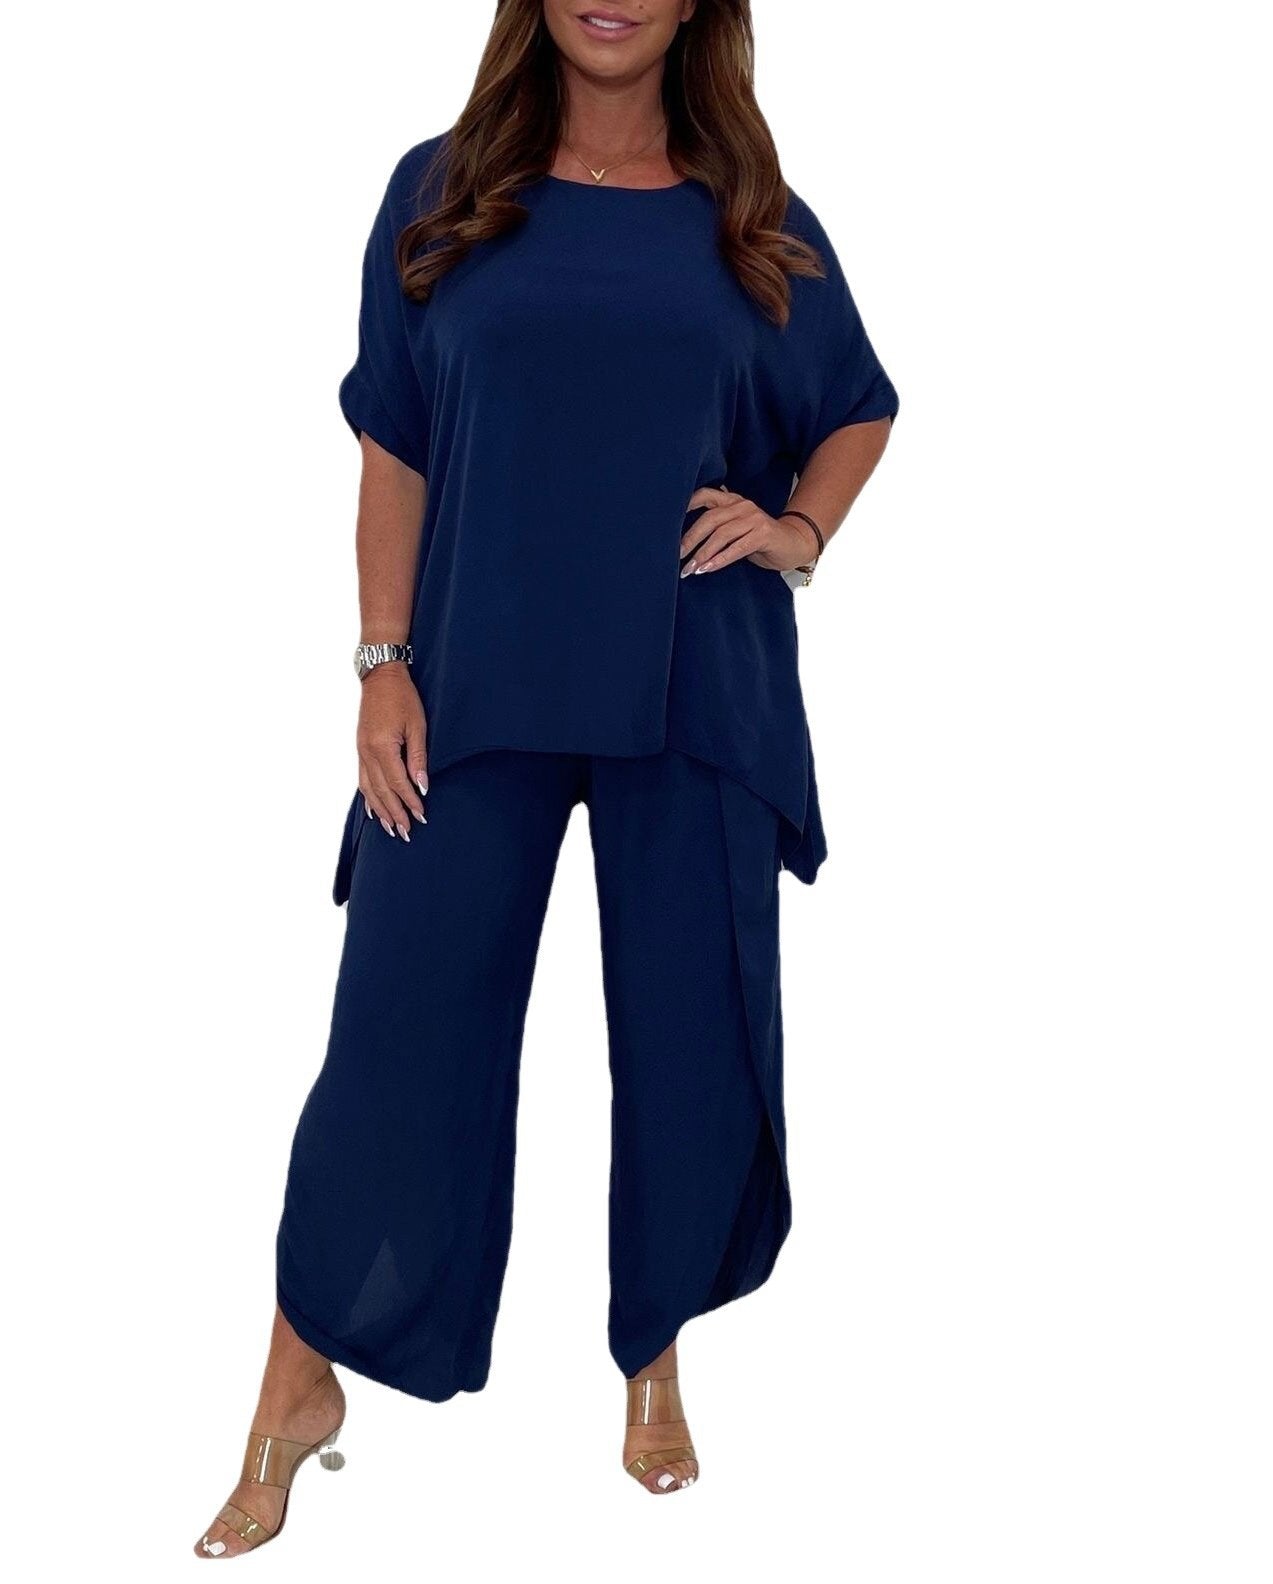 Women's Fashion Casual Loose Large Size Short Sleeve Suit